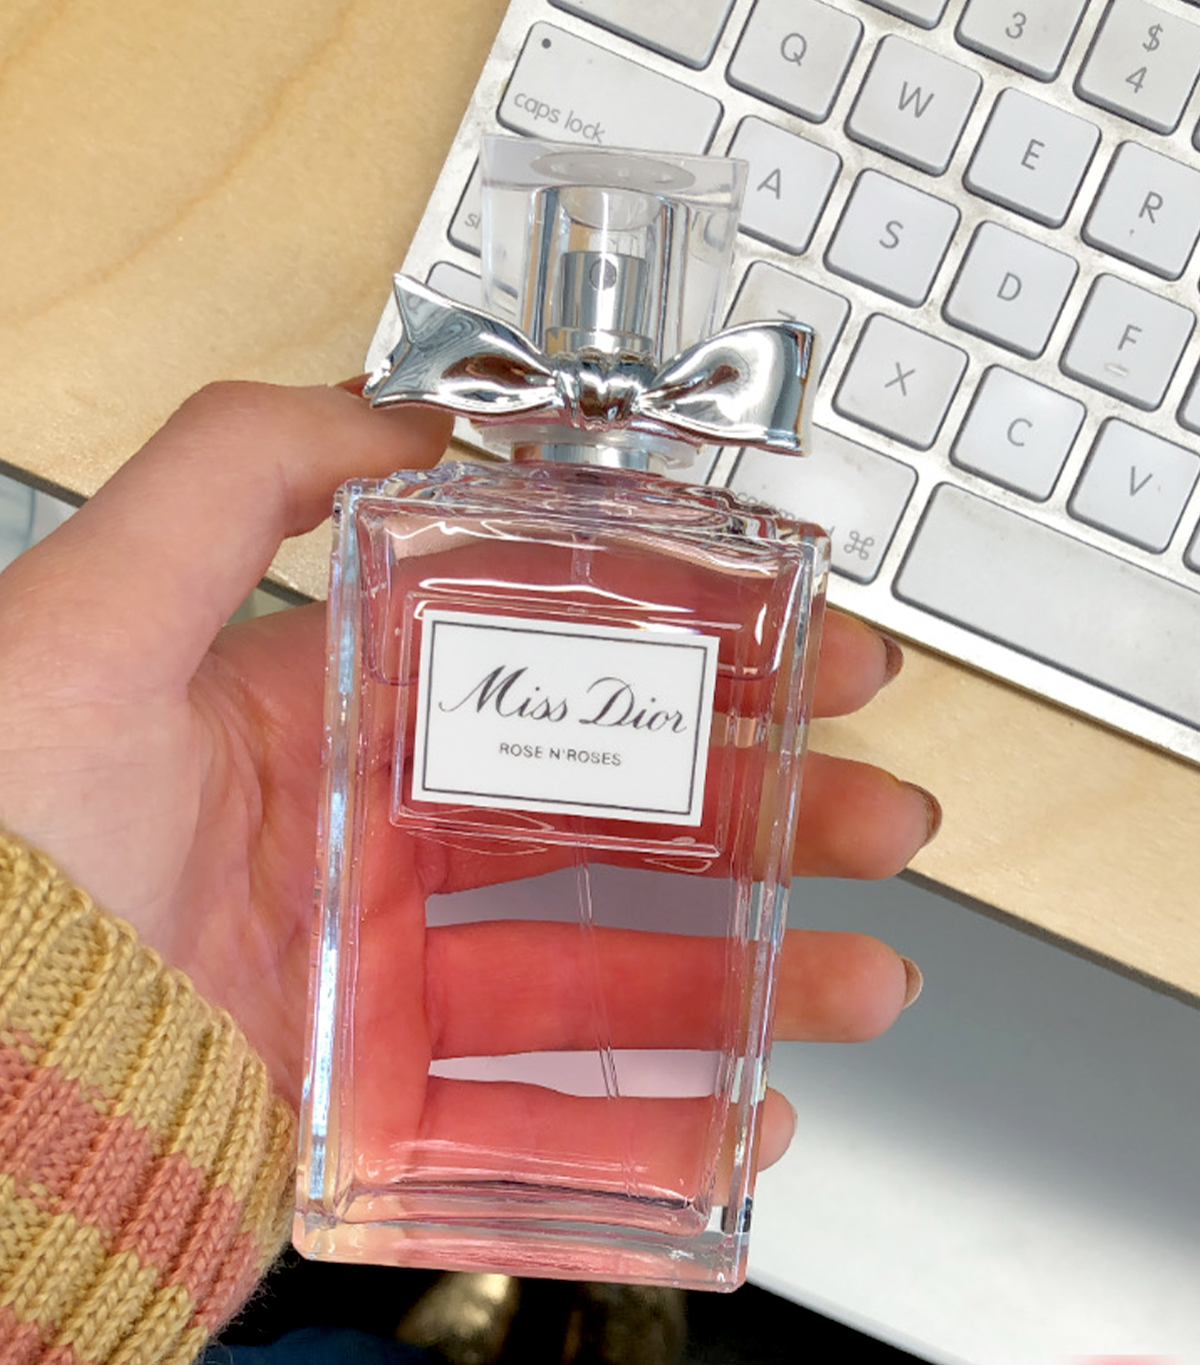 Best Beauty Products January 2020: Miss Dior perfume bottle